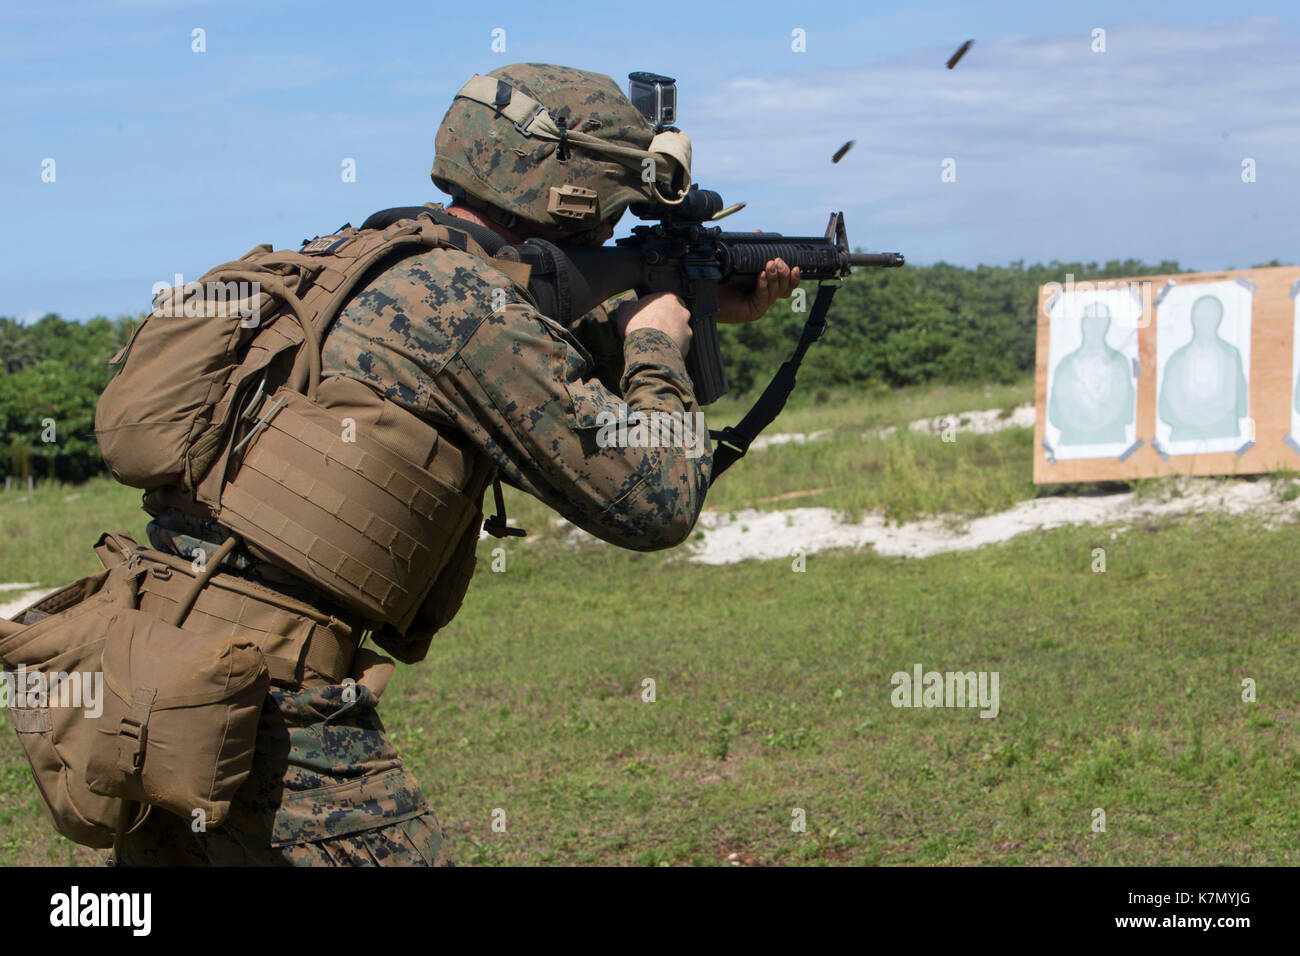 31st Marine Expeditionary Unit, fires an M16A4 service rifle Stock Photo